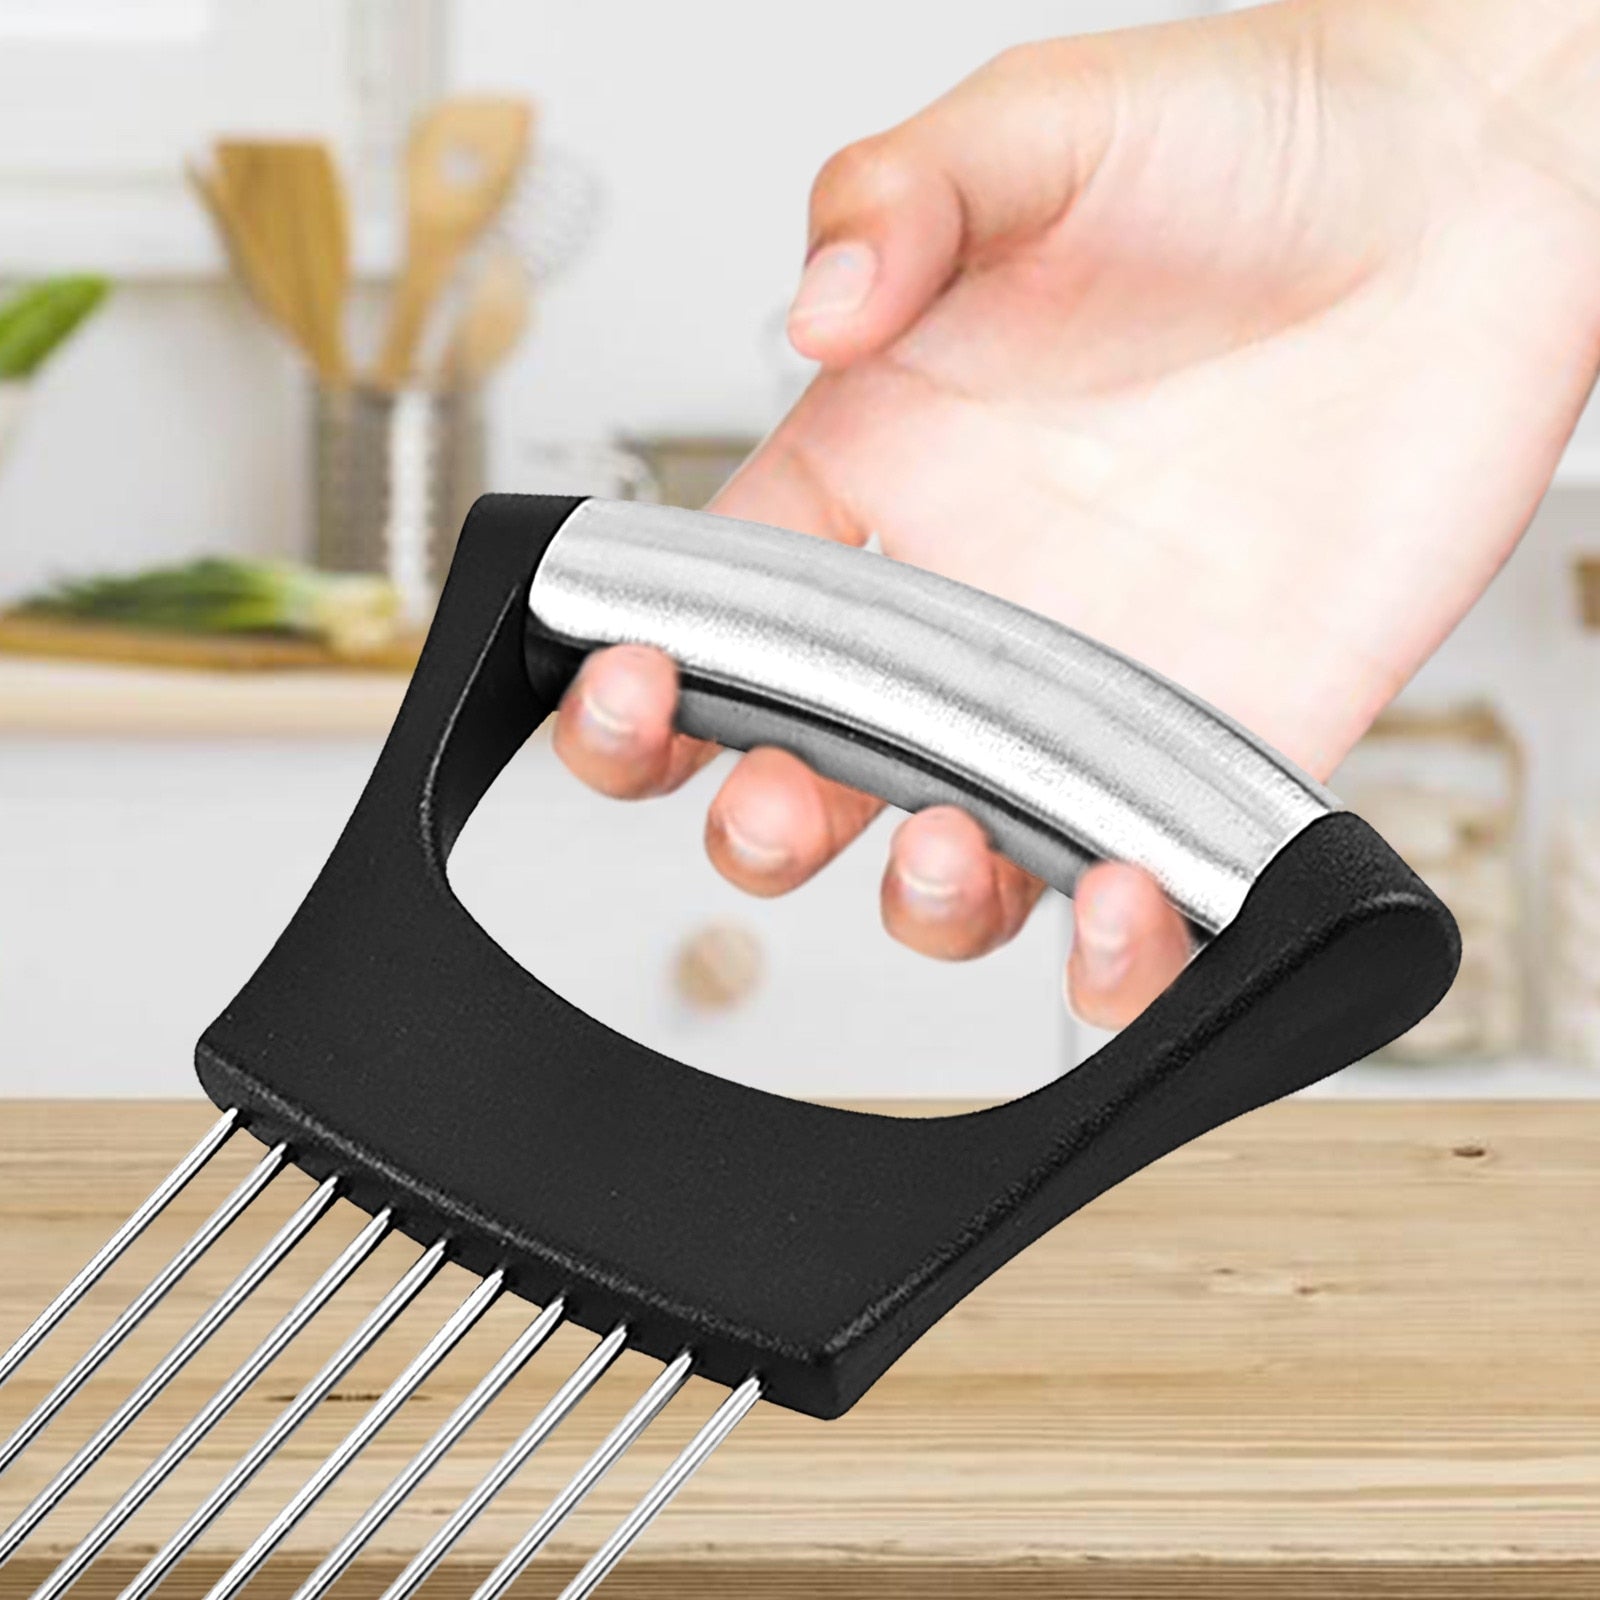 Food Slice Assistant Onion Holder Cutting Aid Strips Meat Sale Slicer HOT  A5F3